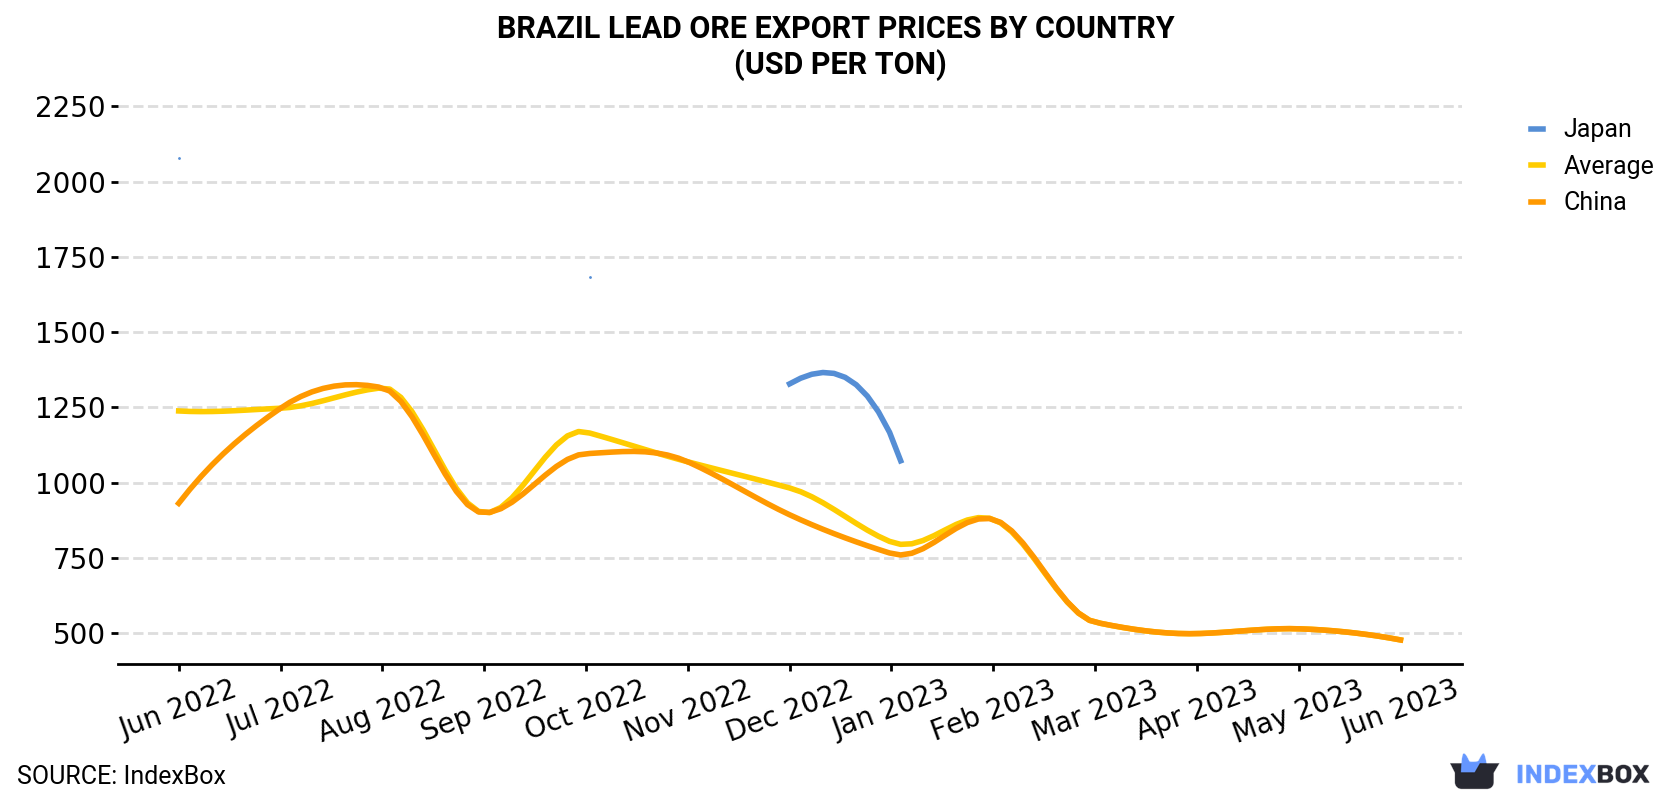 Brazil Lead Ore Export Prices By Country (USD Per Ton)